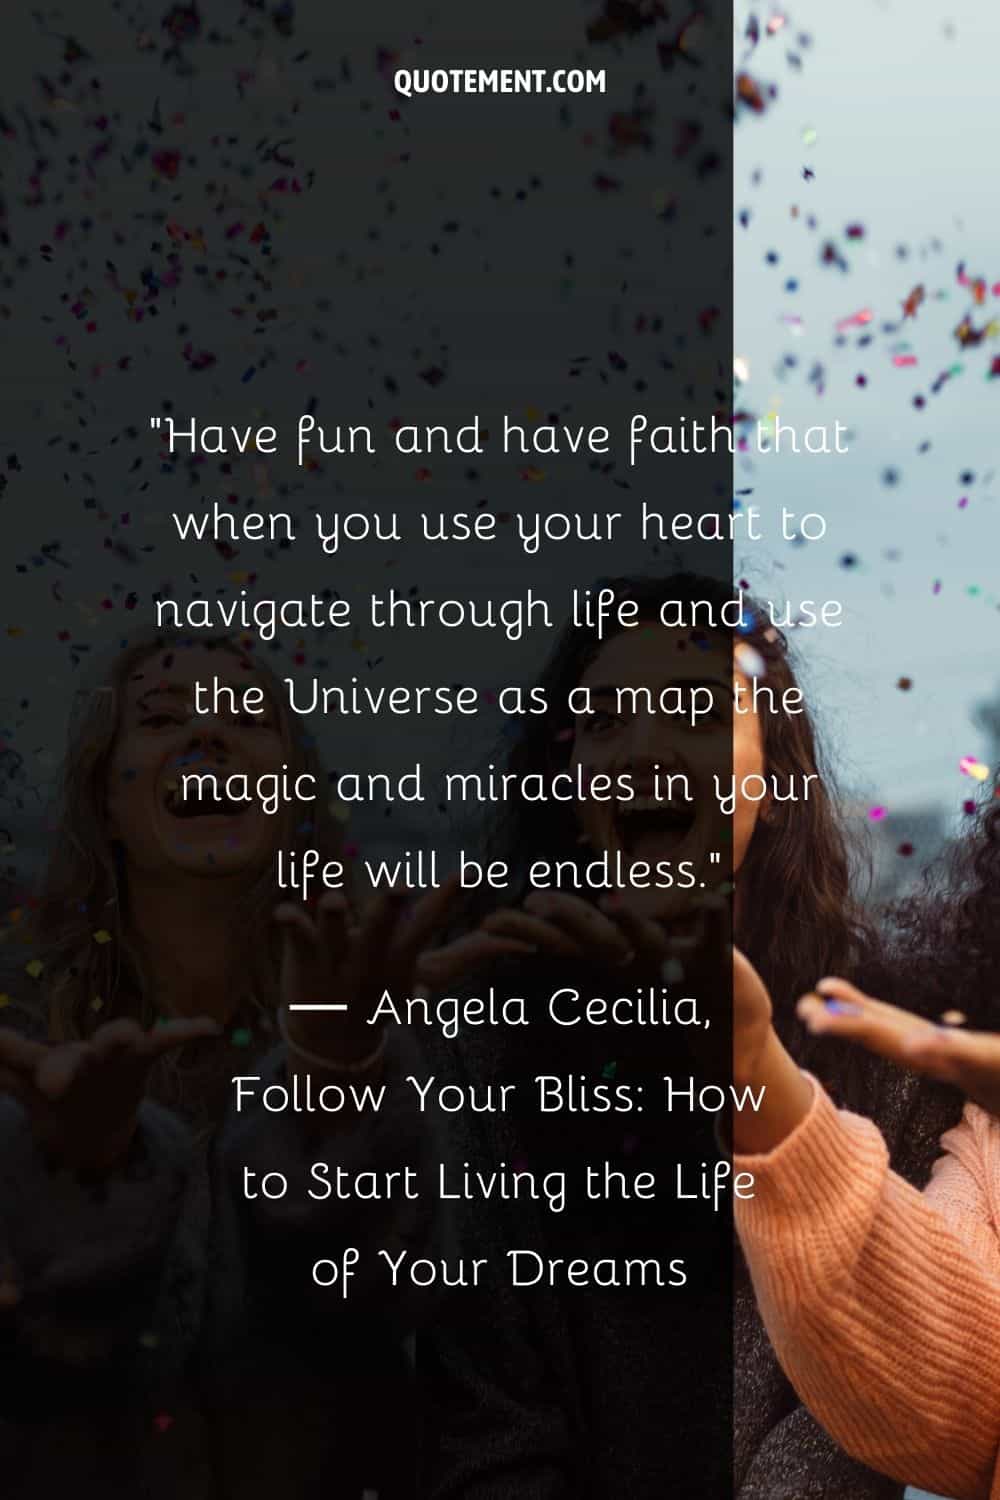 Have fun and have faith that when you use your heart to navigate through life and use the Universe as a map the magic and miracles in your life will be endless.